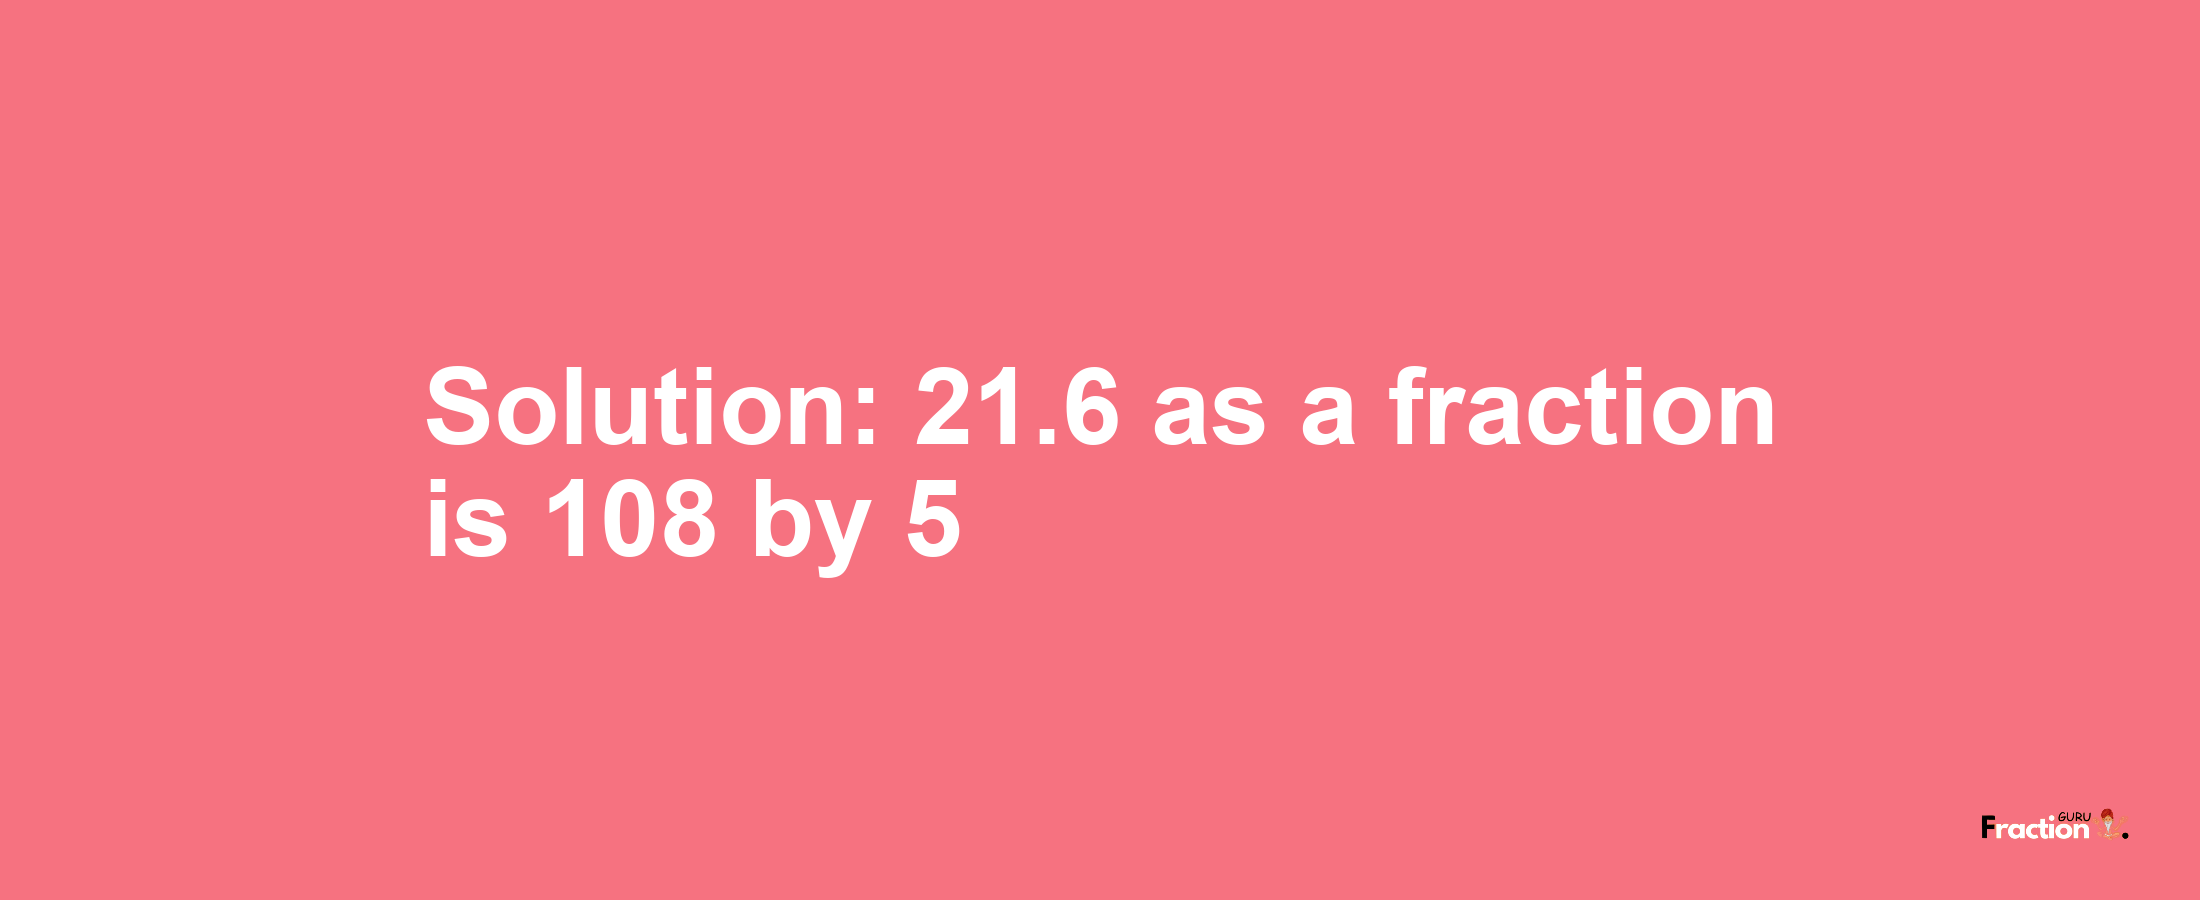 Solution:21.6 as a fraction is 108/5